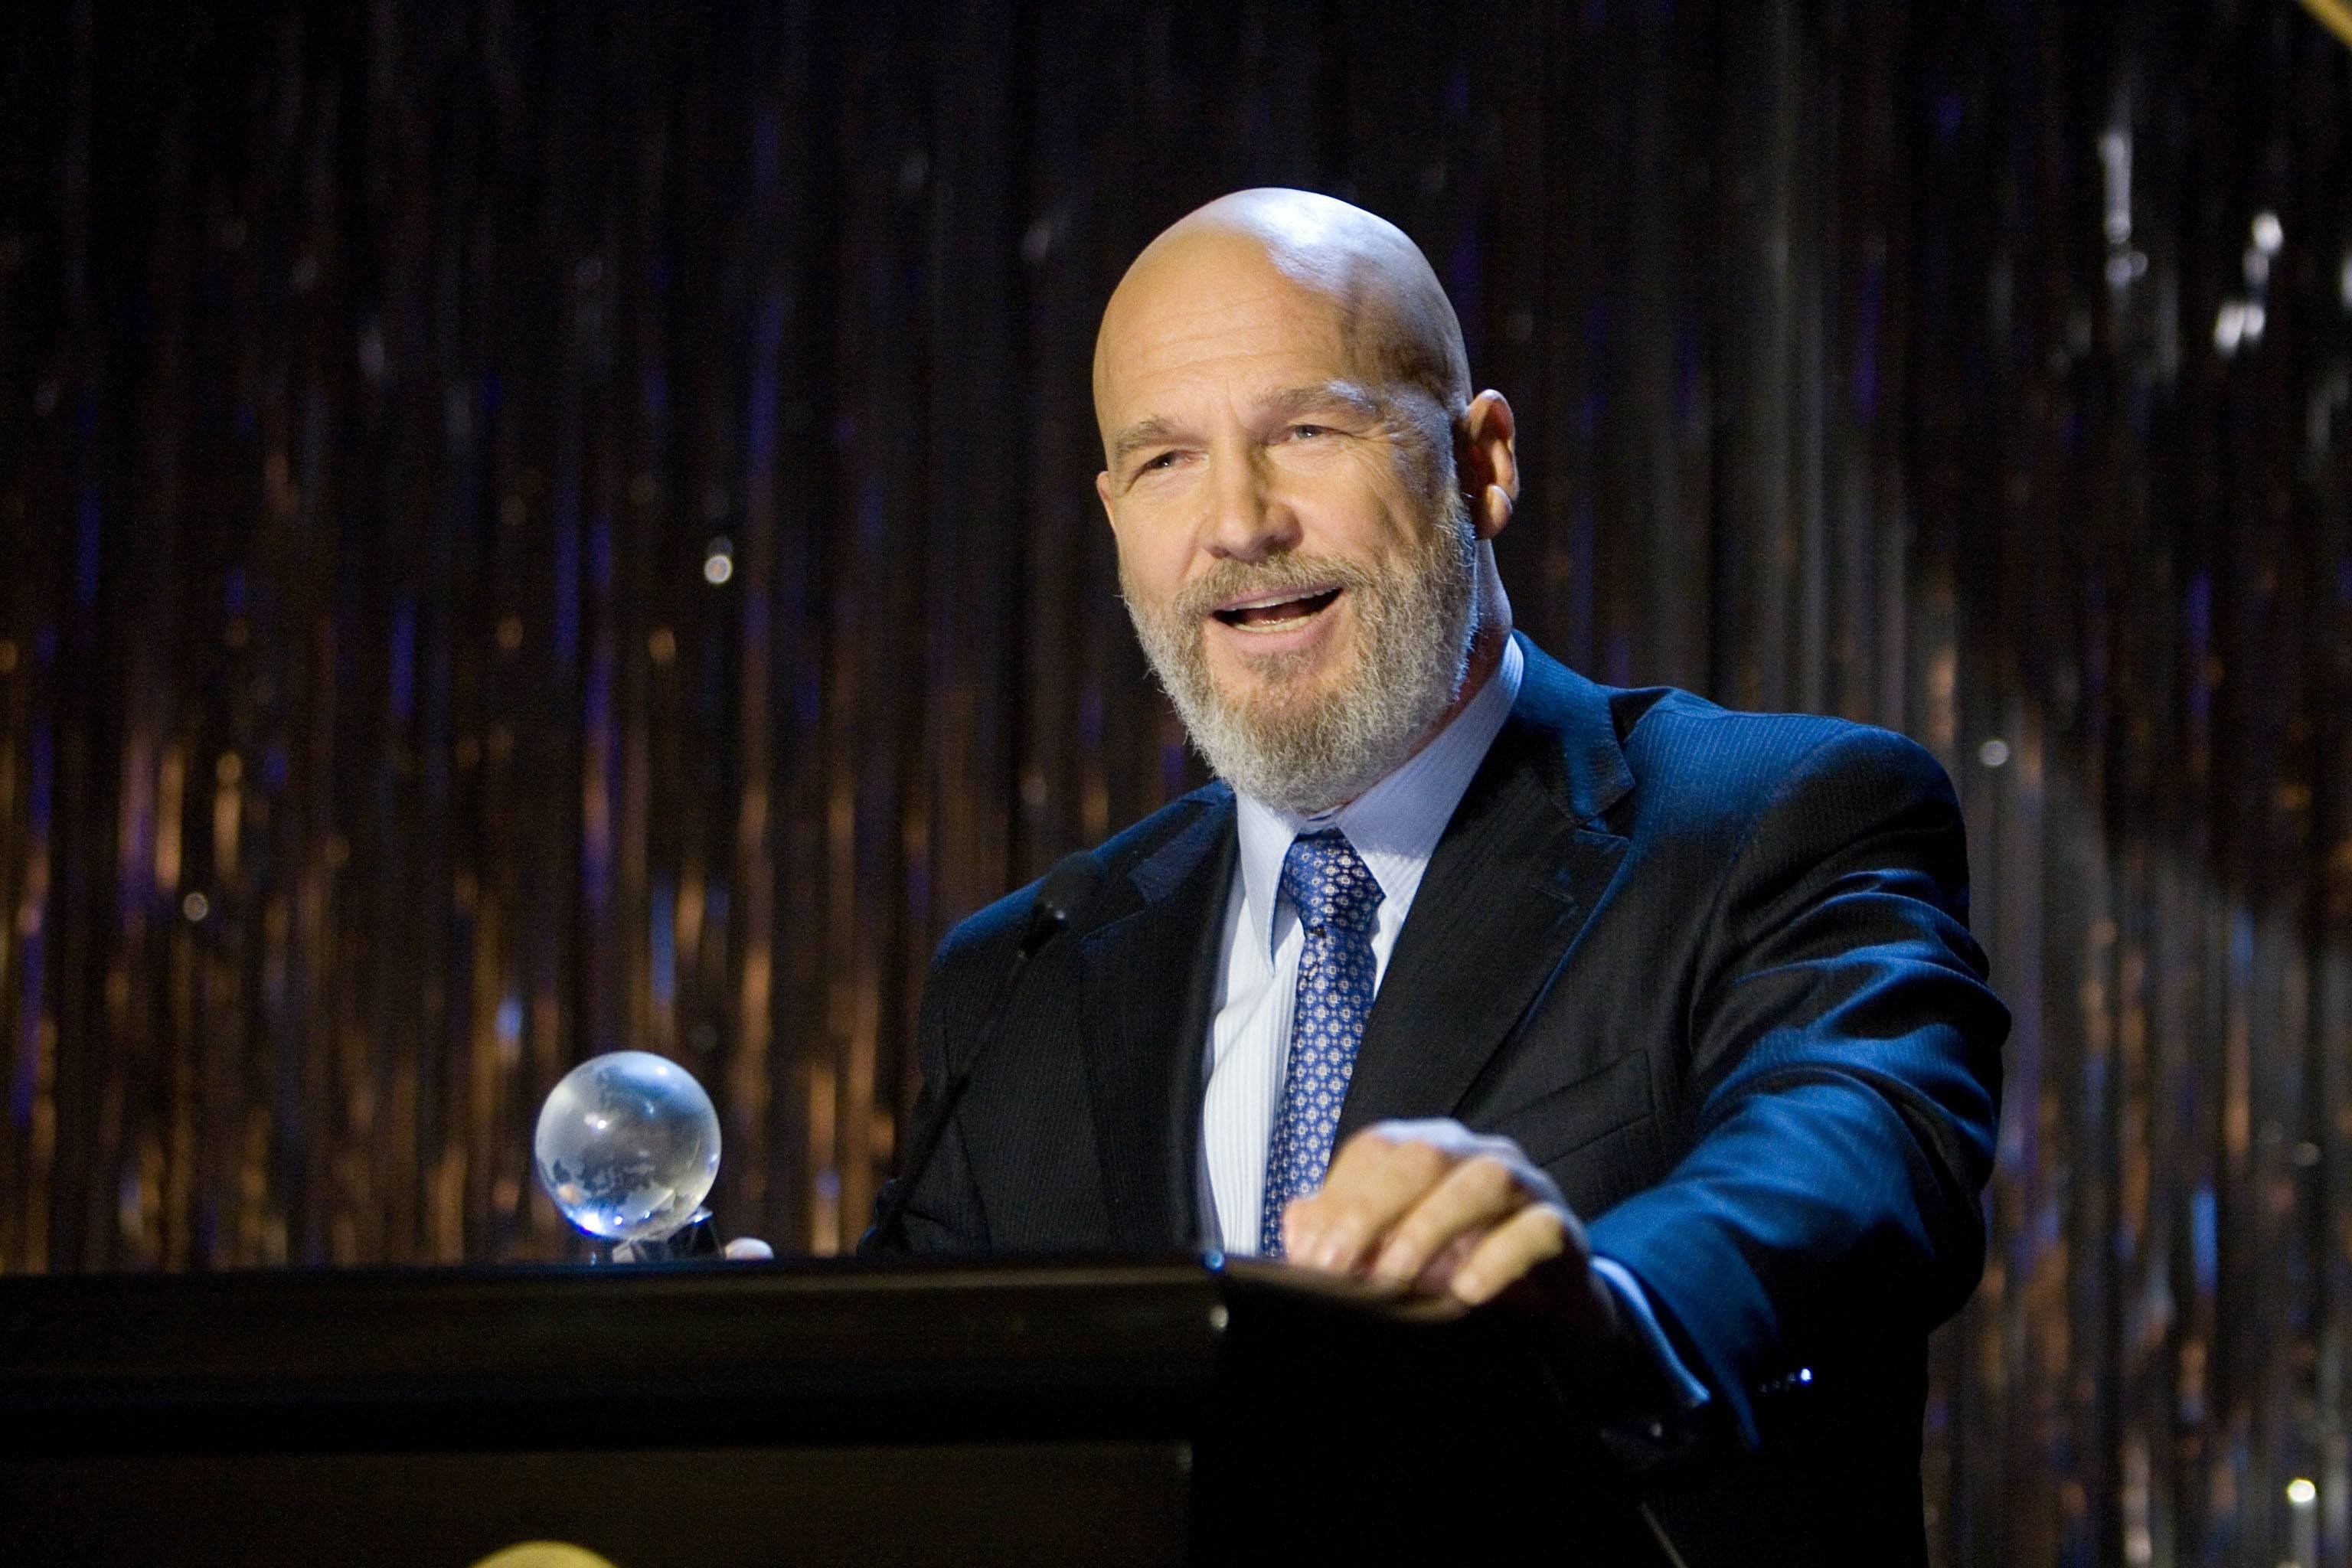 Obadiah Stane: The business partner of Tony Stark and a good friend of his father, Howard Stark. 3080x2050 HD Background.